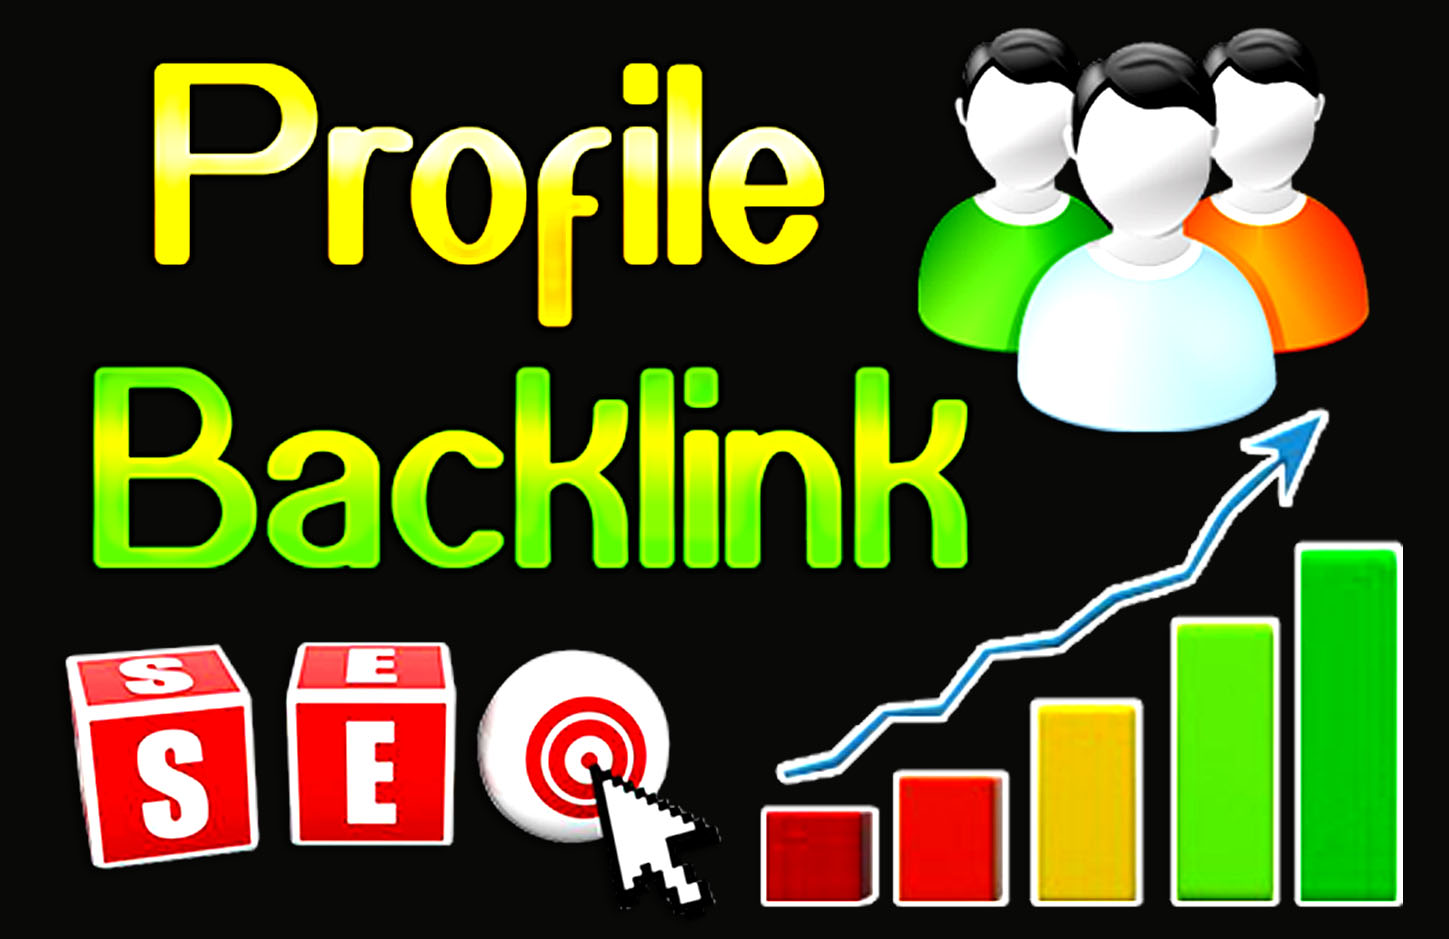 1000 forum profiles for your website